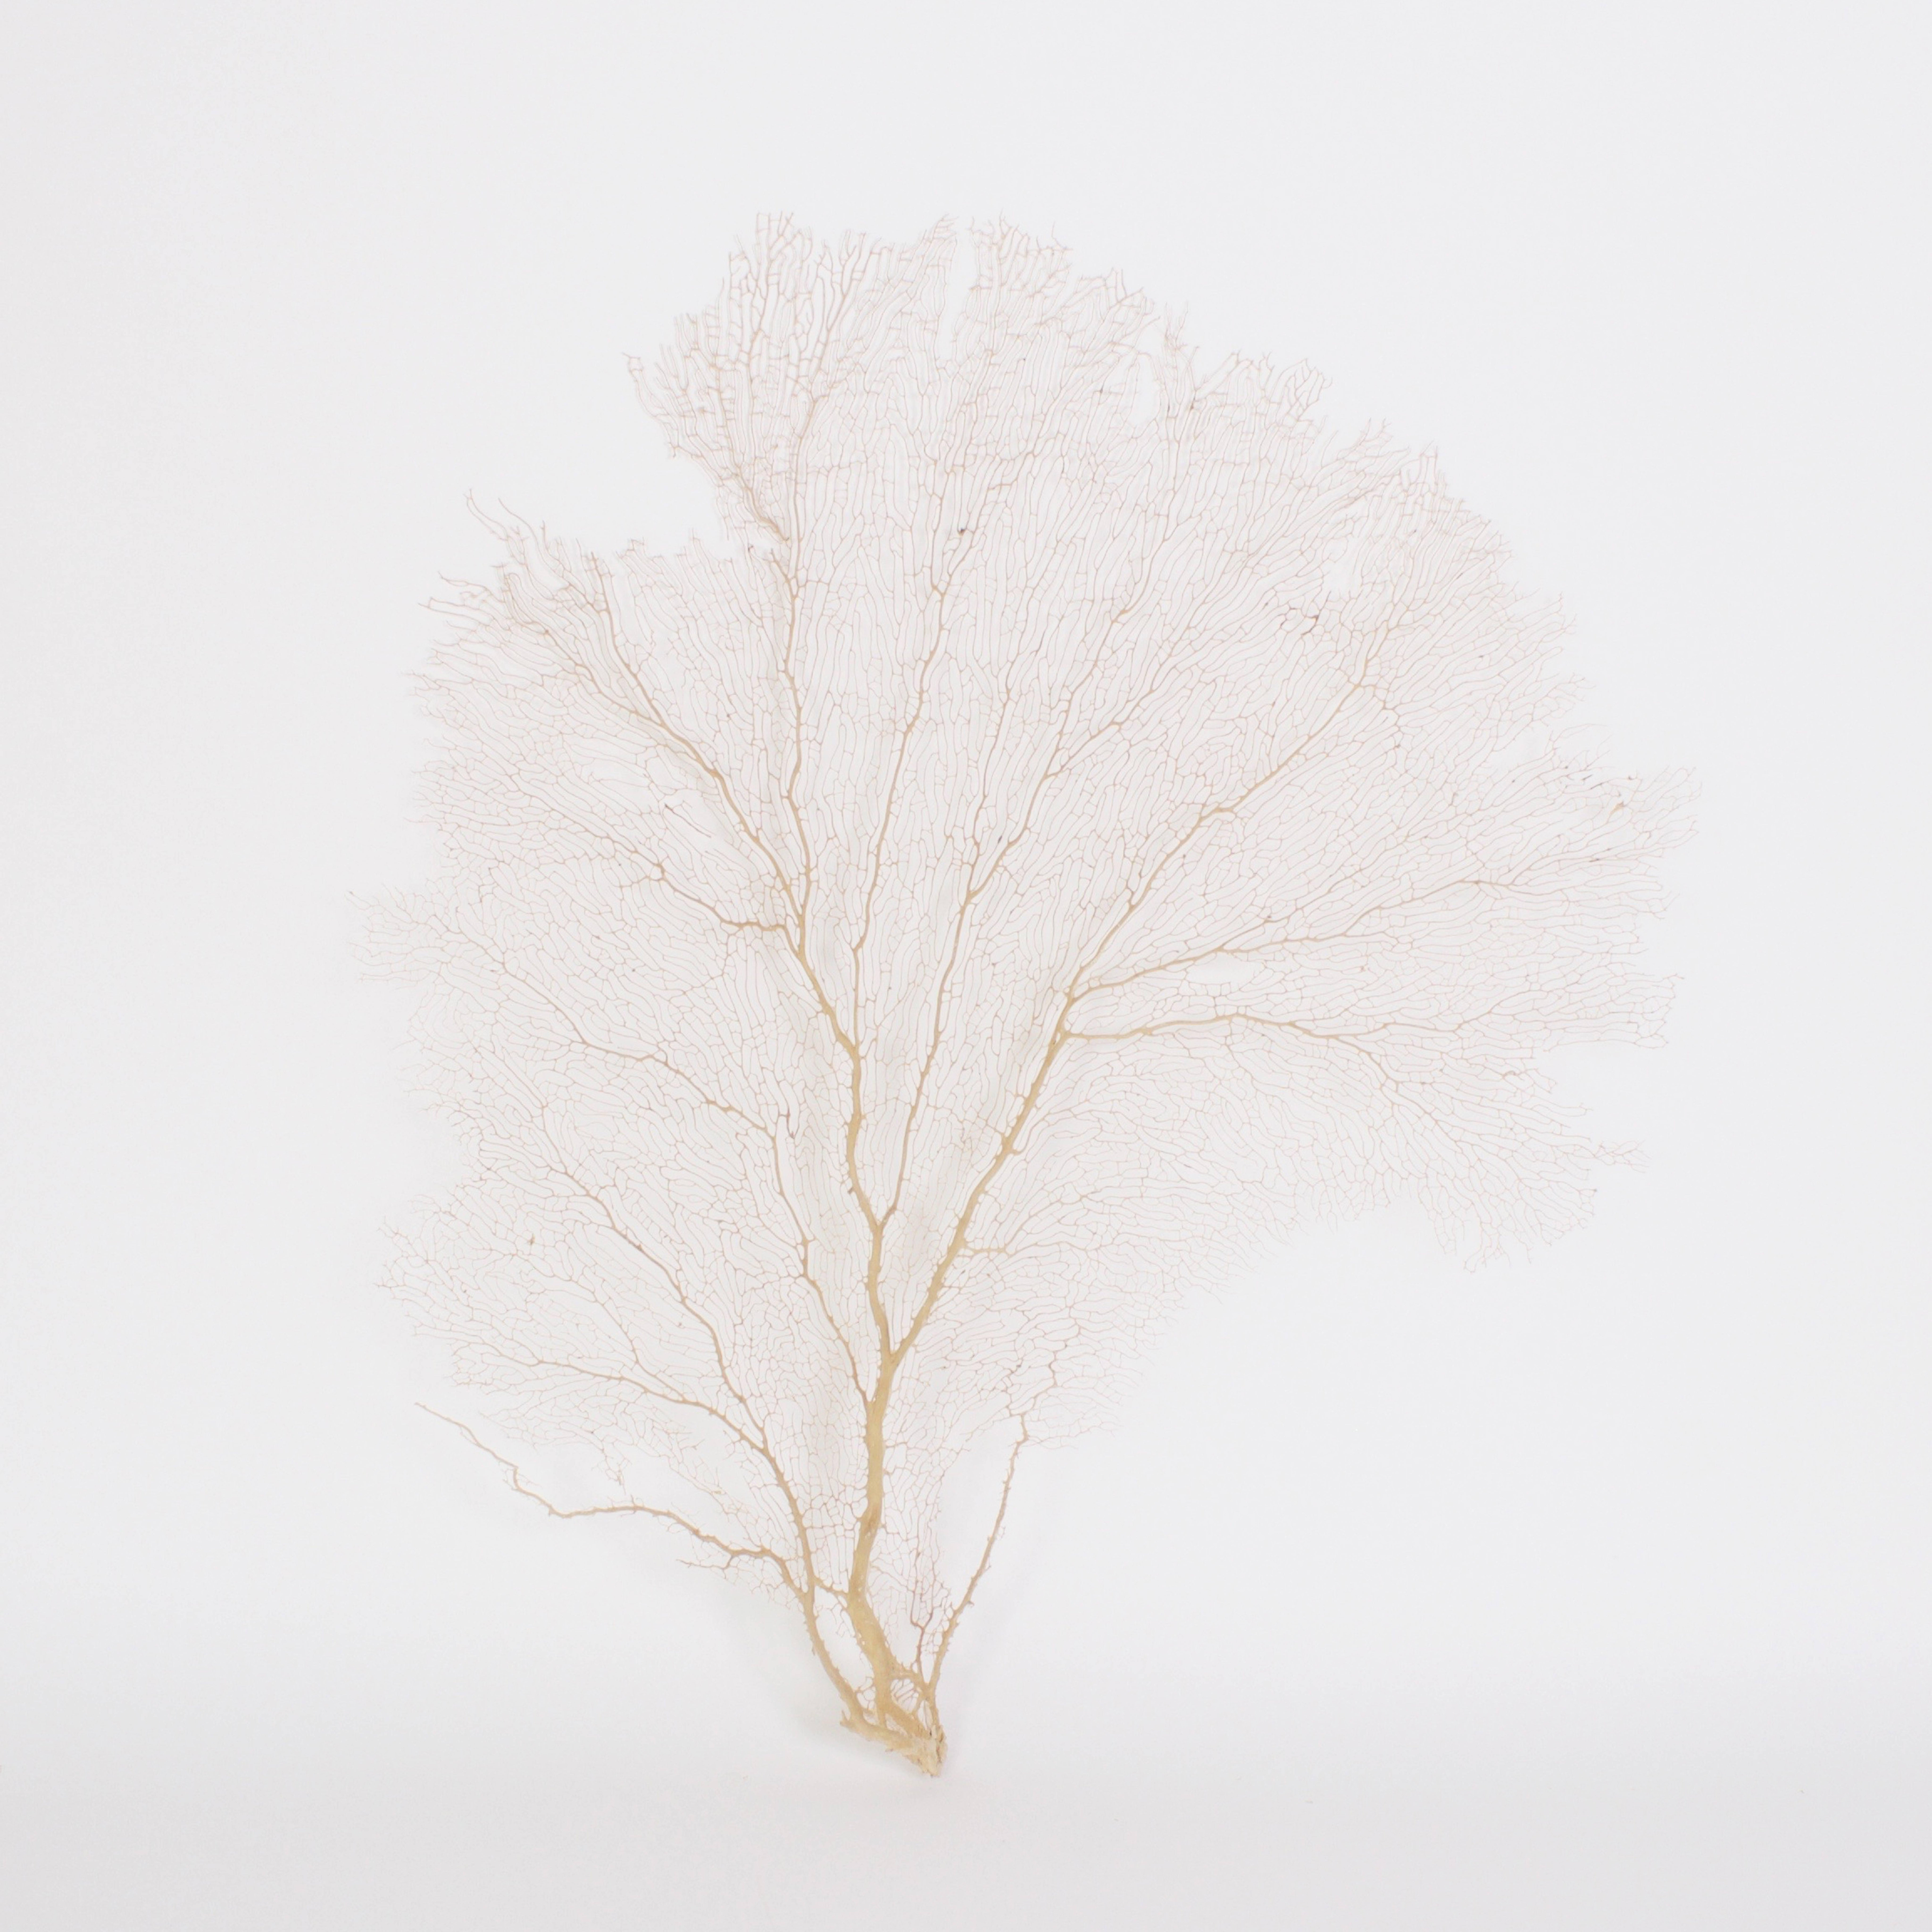 Pair of large authentic sea fans with an organic sculptural form. Why not hang them on a wall and enjoy the grace and style of Mother Nature. Priced individually. 

Left sea fan ref: 55SFL (H 43, W 38, D 4)
Right sea fan ref: 55SFM (H 41, W 37, D